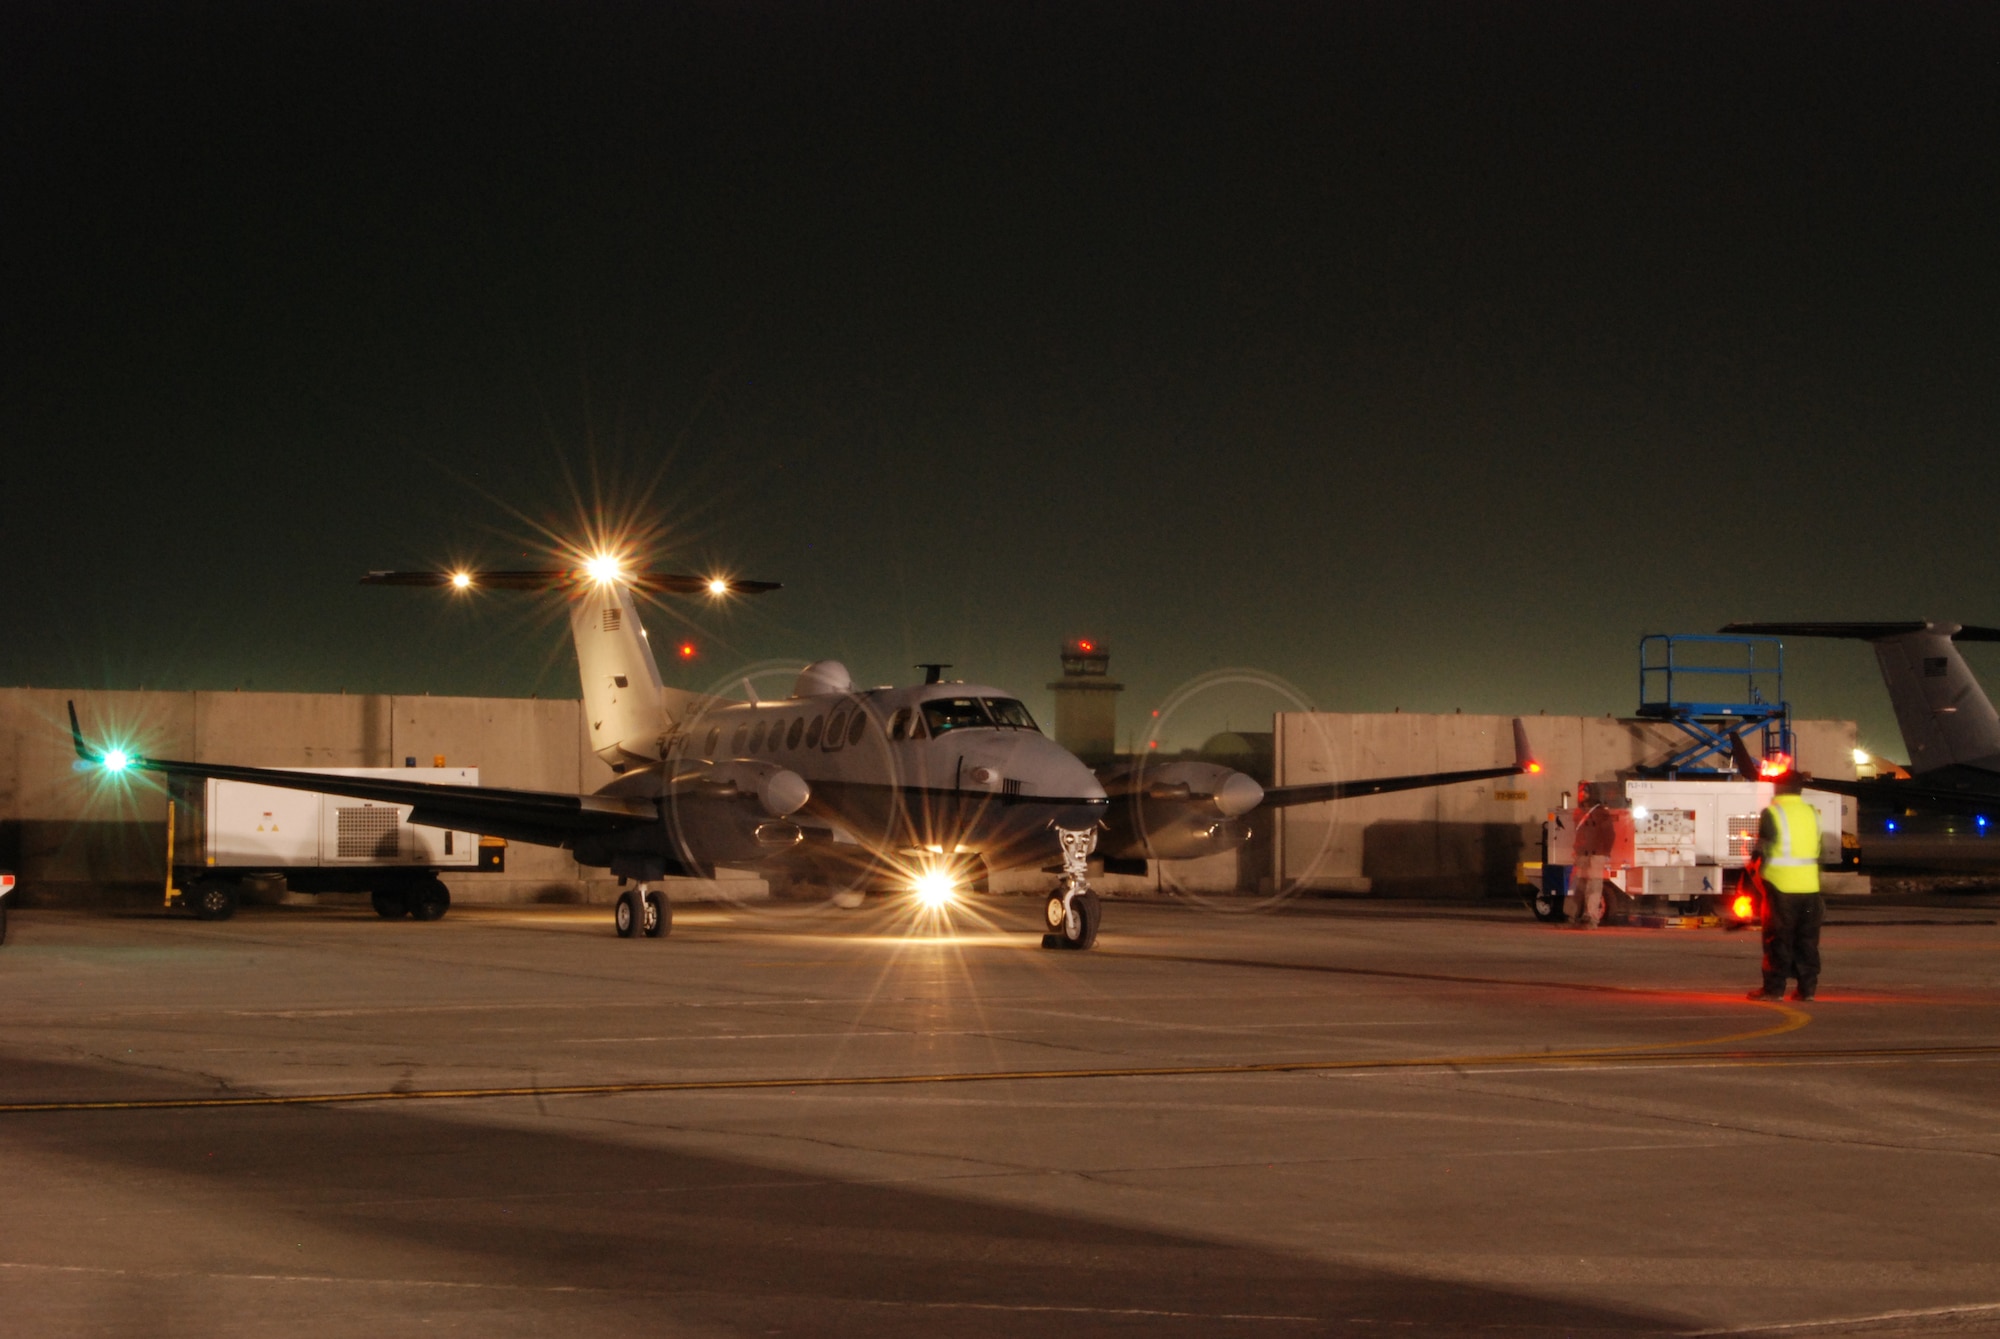 A MC-12W Liberty prepares to taxi at Bagram Air Field, Afghanistan, Feb. 11, 2014. The MC-12W is vital to intelligence, surveillance and reconnaissance missions throughout Afghanistan. (U.S. Air Force photo by Capt. Brian Wagner/Released)